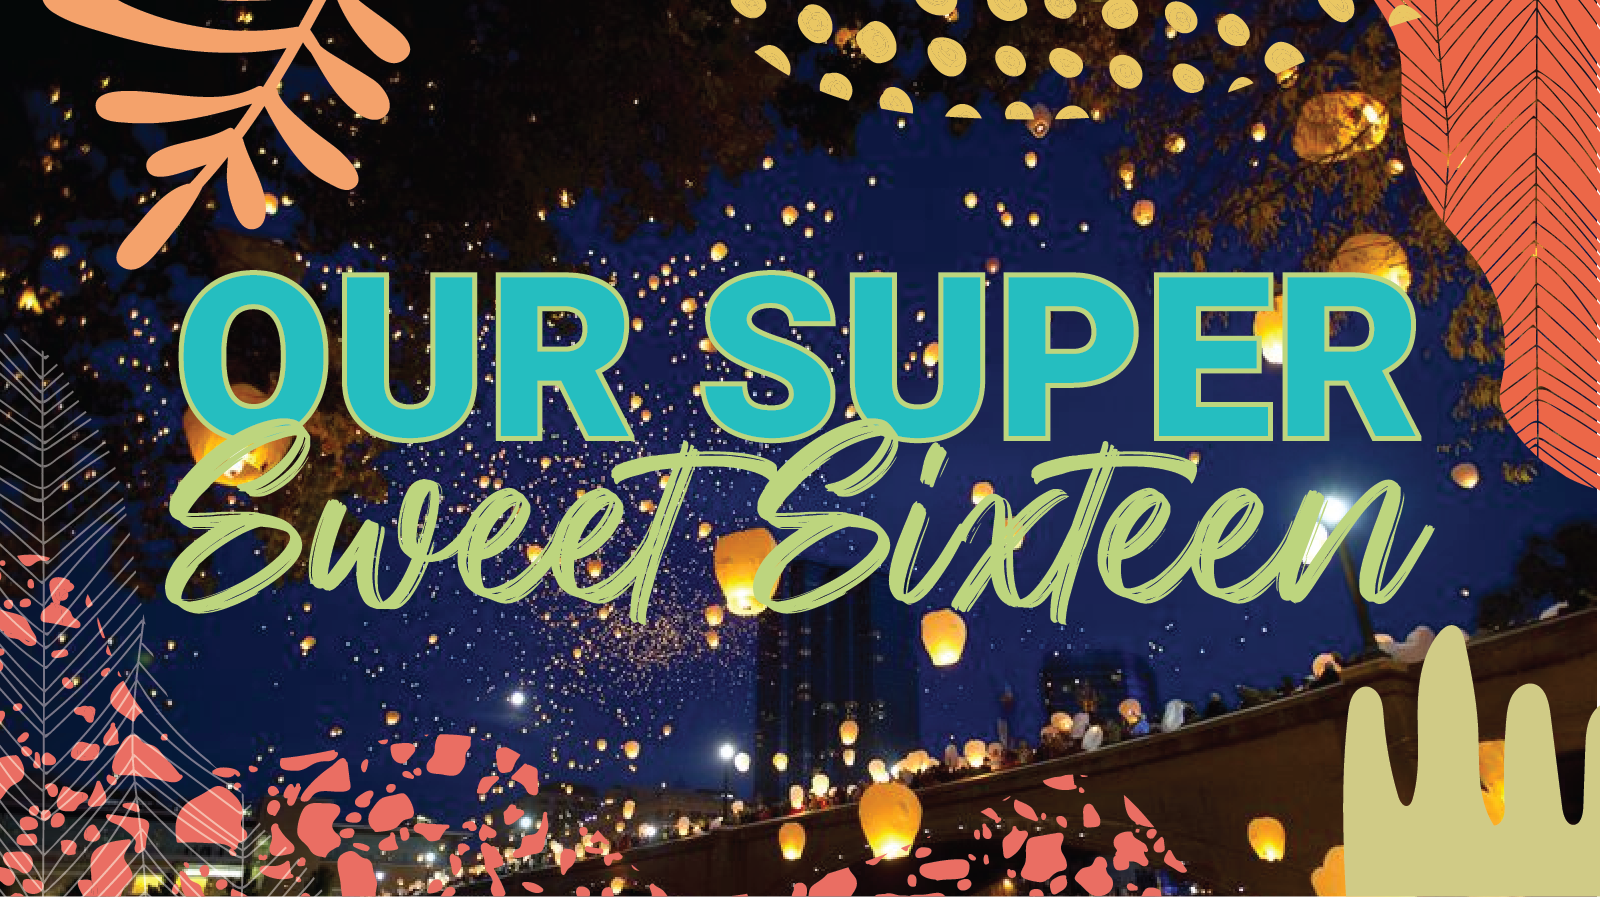 Thousands of fire lanterns fill the Grand Rapids skyline behind the words, "Our Super Sweet Sixteen"